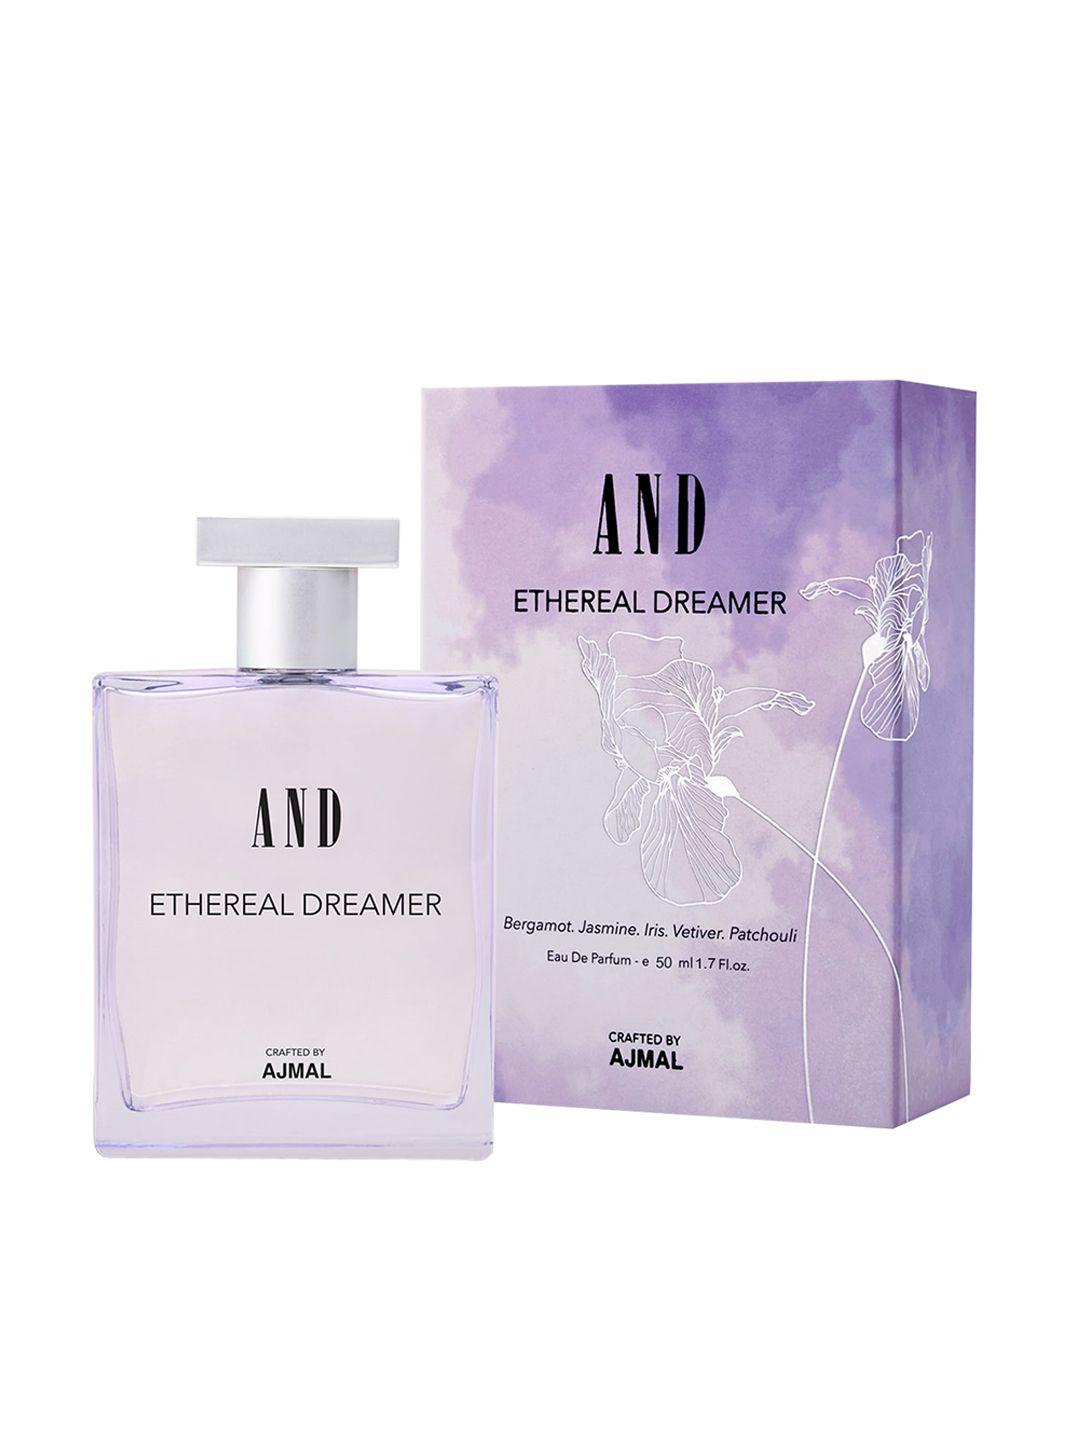 and ethereal dreamer edp - 50 ml  crafted by ajmal